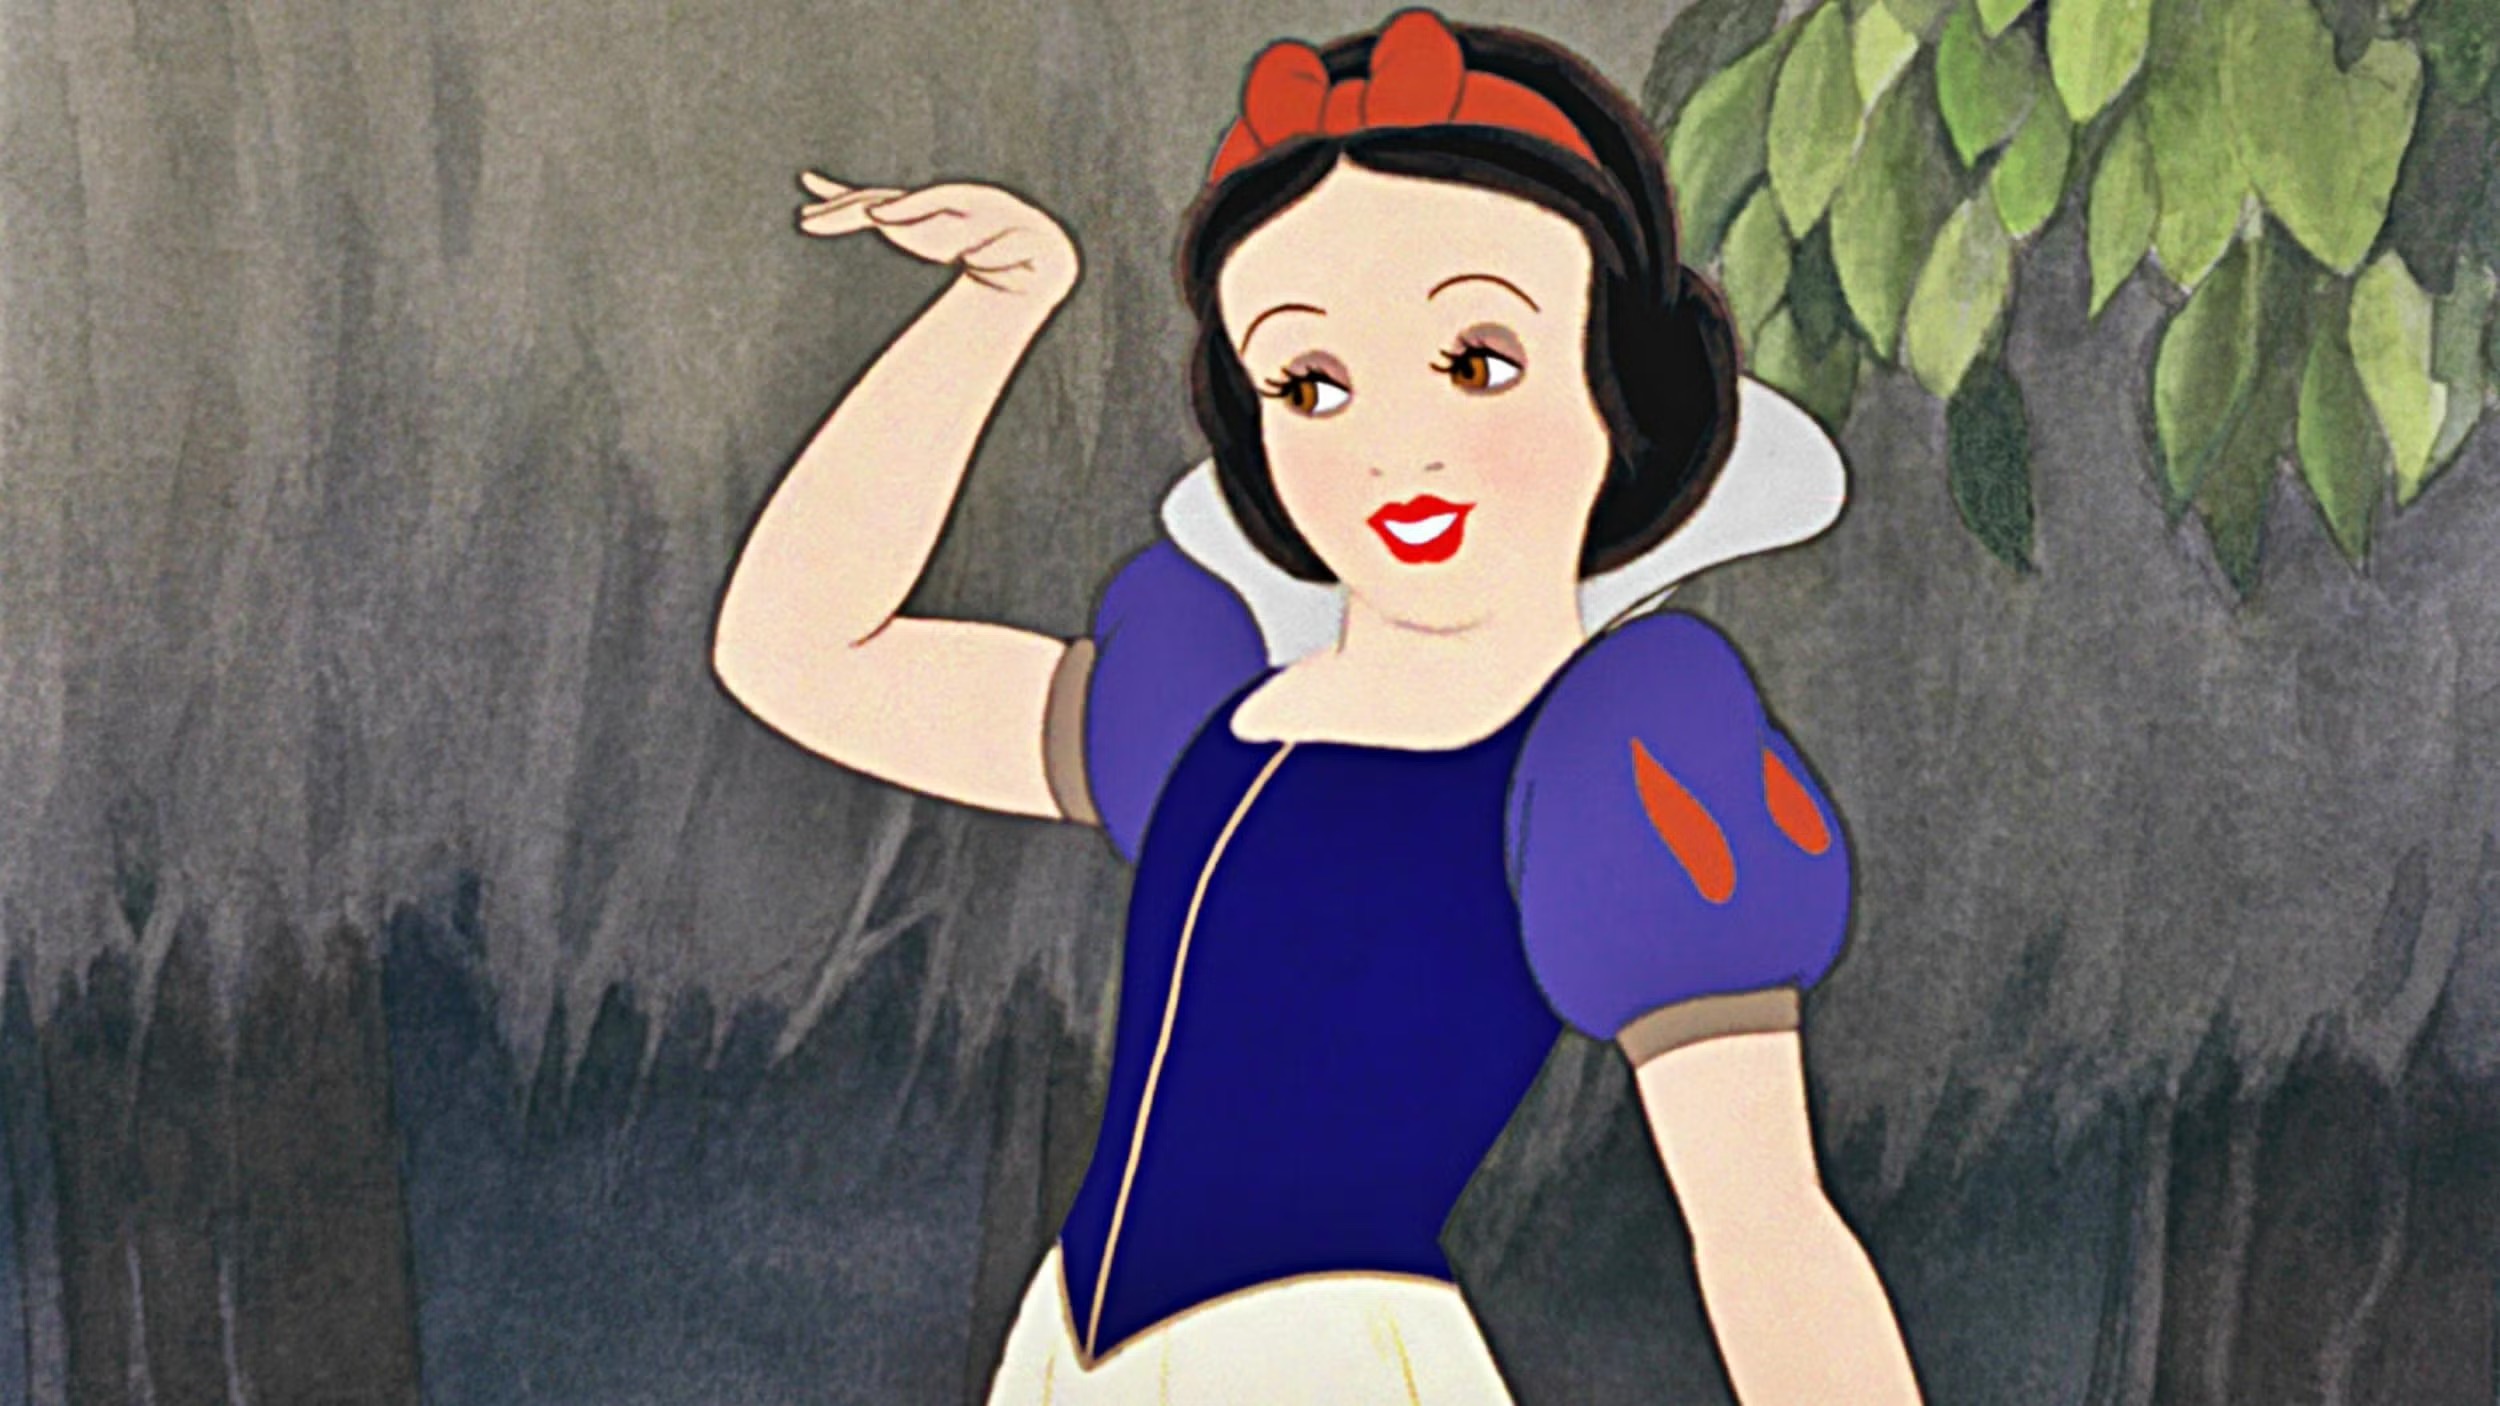 New version of Snow White reported to be 'one big mess'